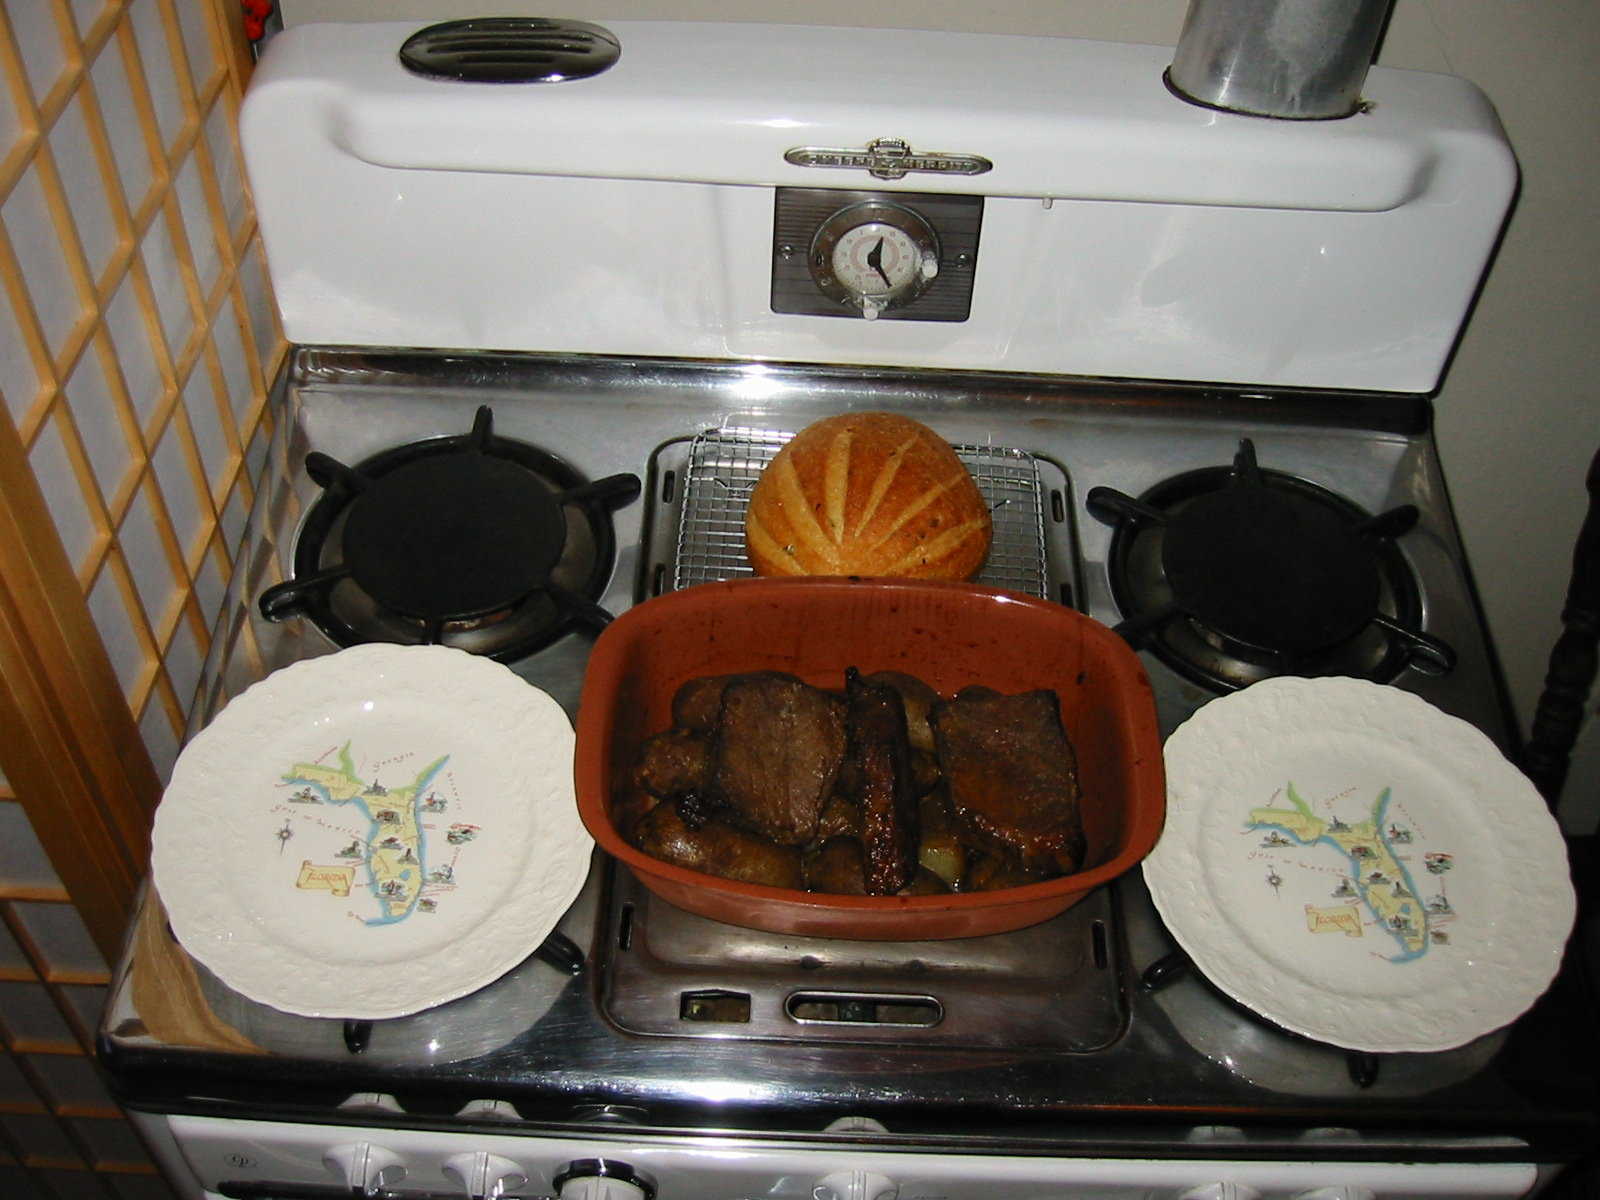 meal%20on%20stove%20at%20Walker%20Ave.JPG